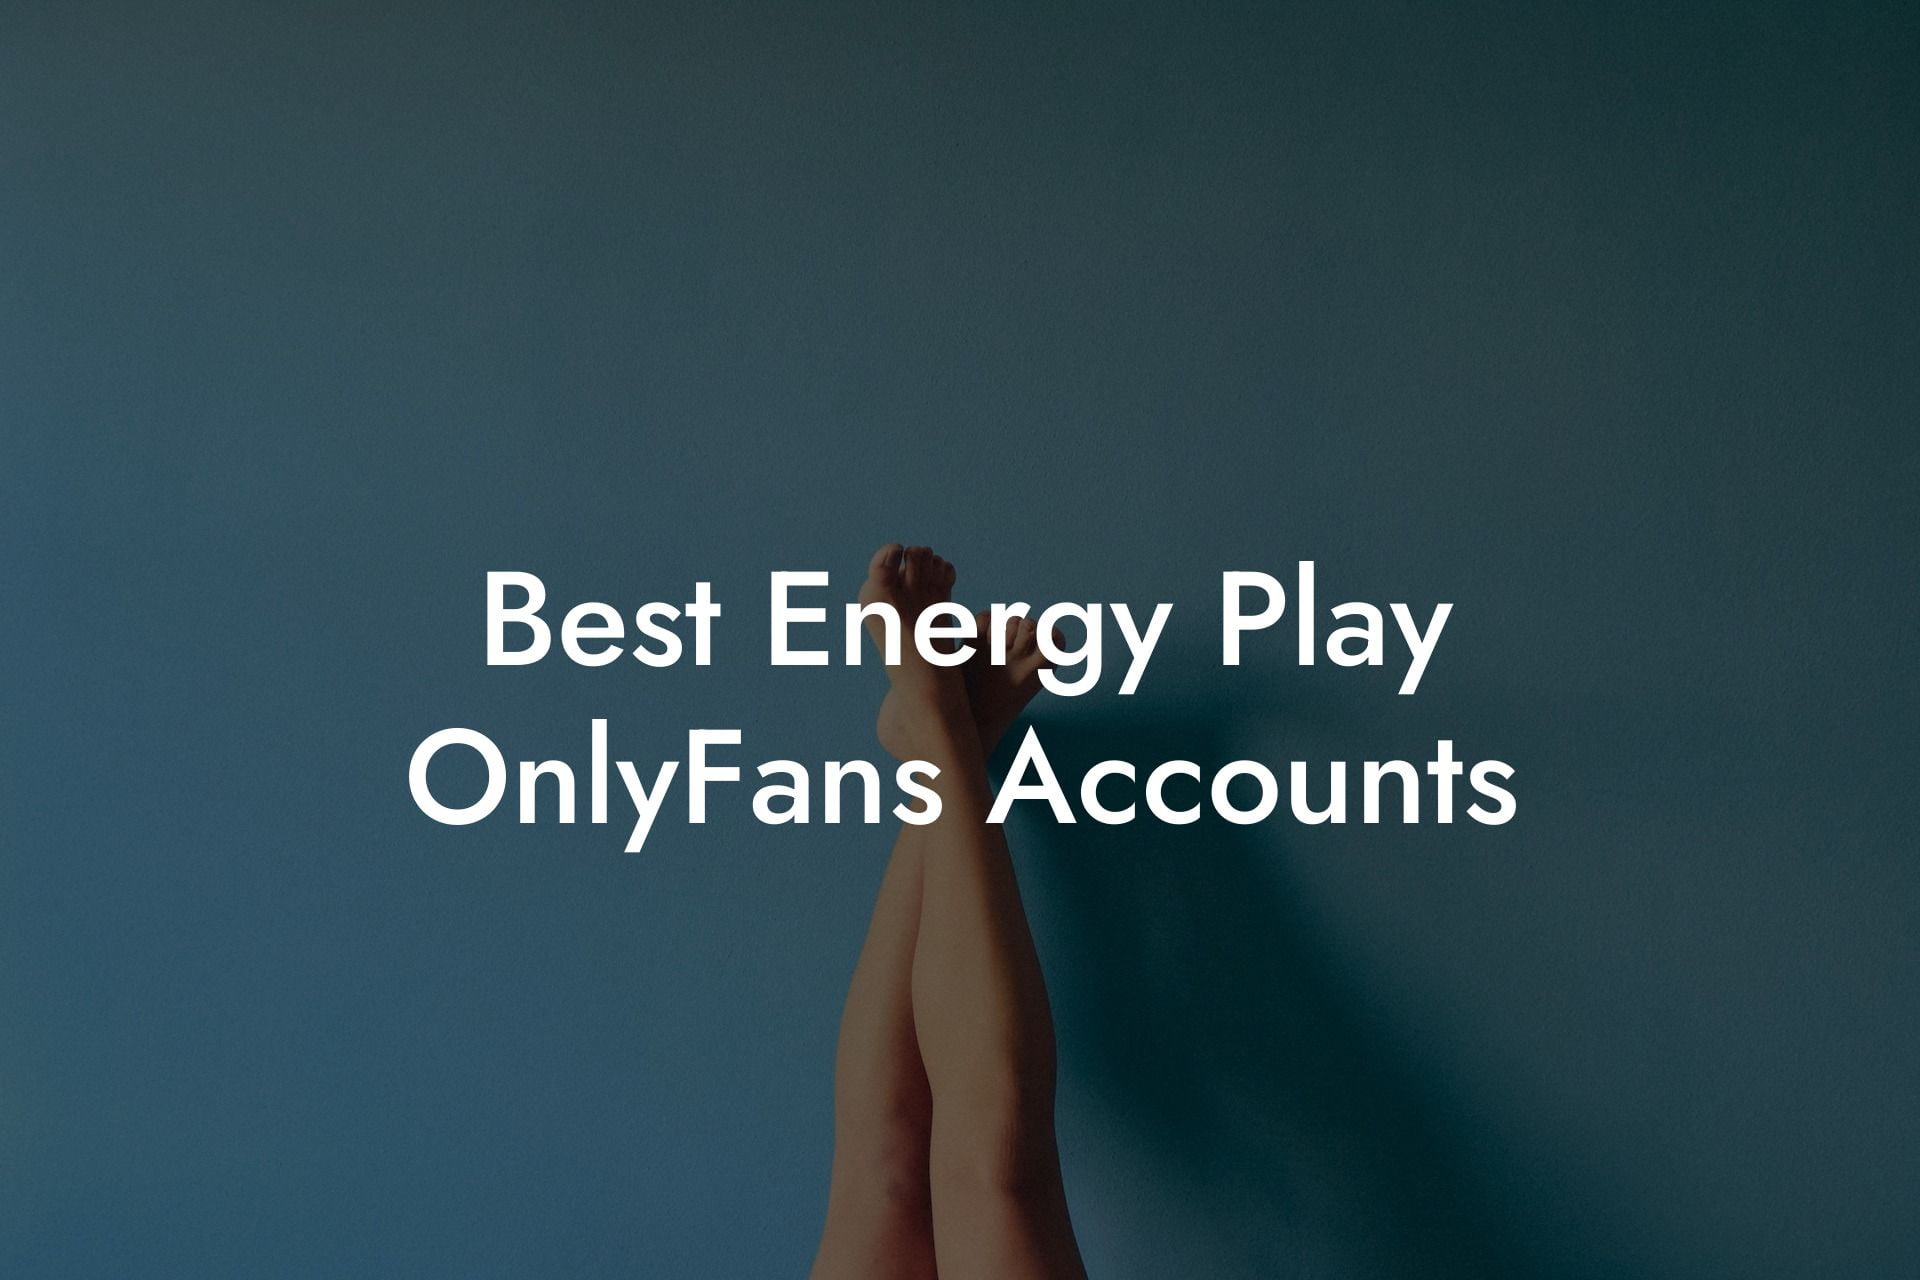 Best Energy Play OnlyFans Accounts